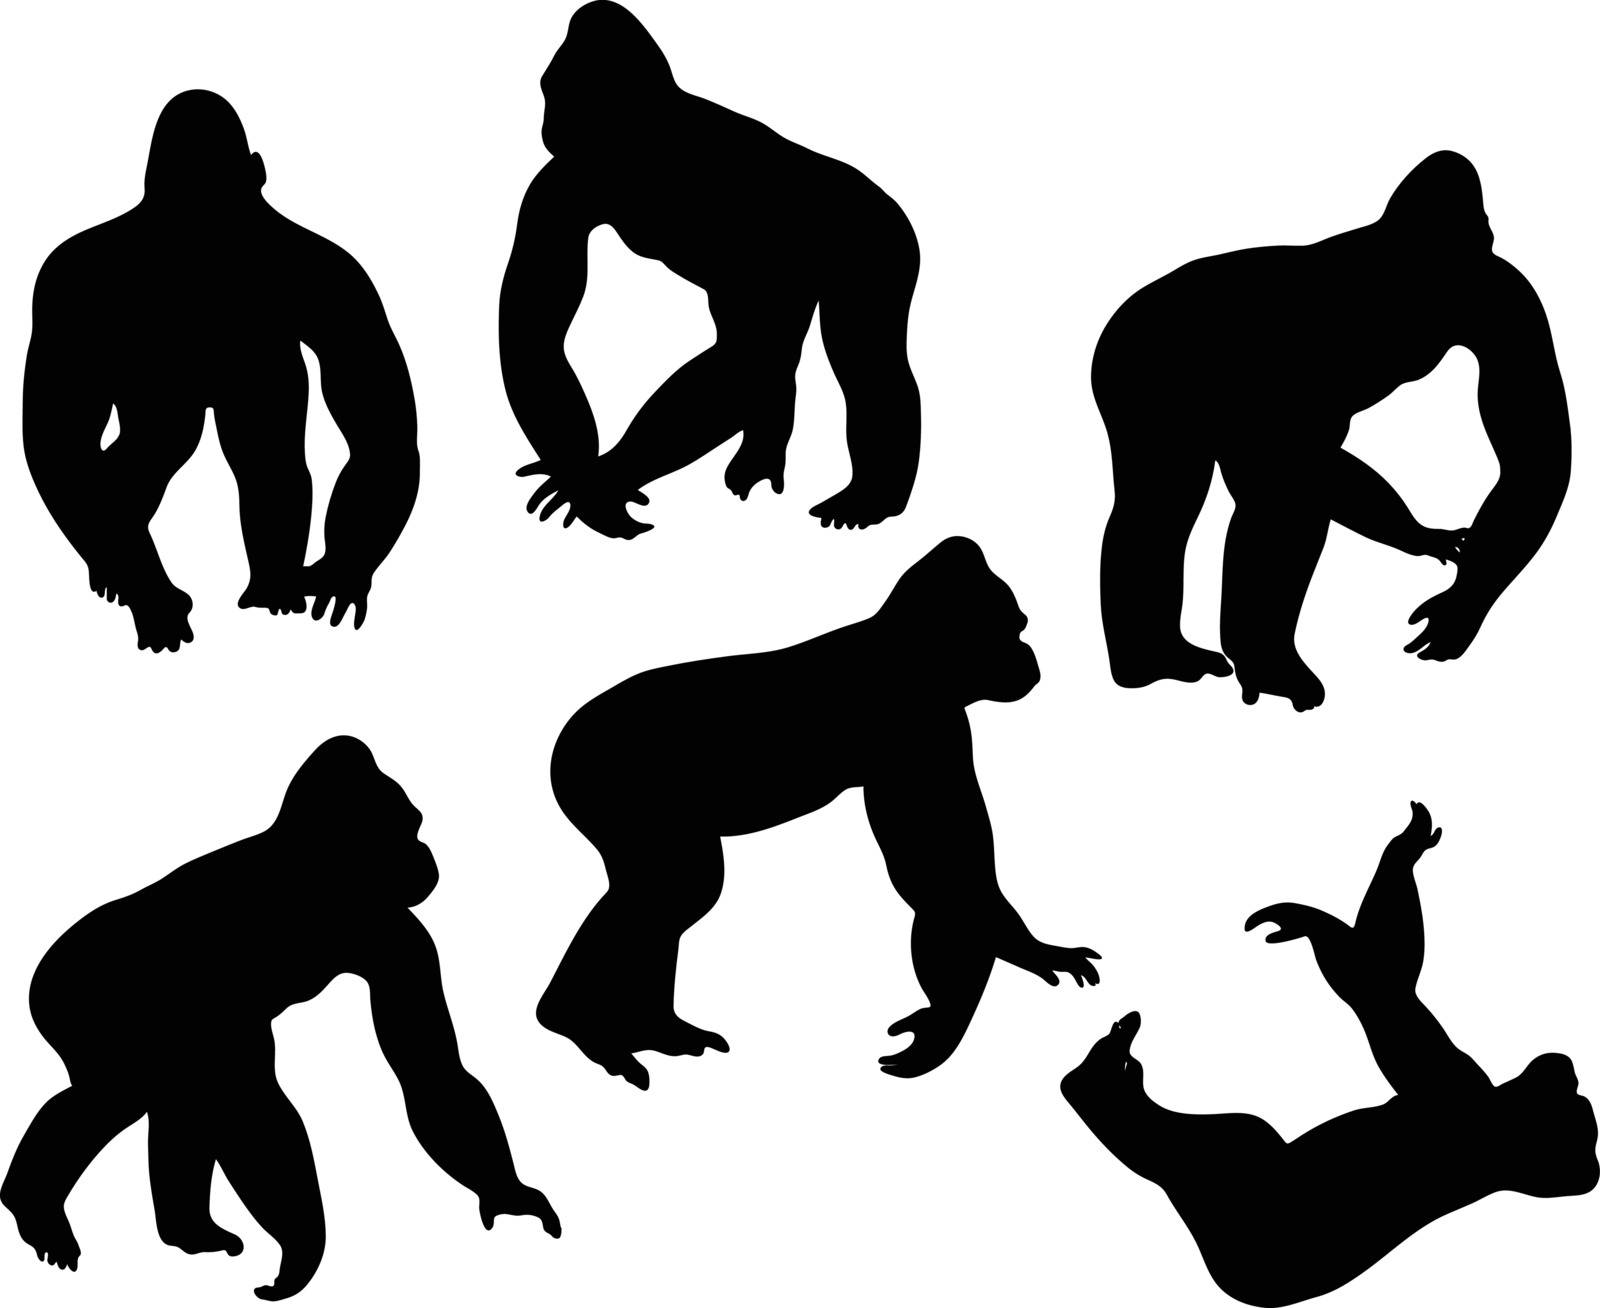 Vector Image - gorilla silhouette, isolated on white background
